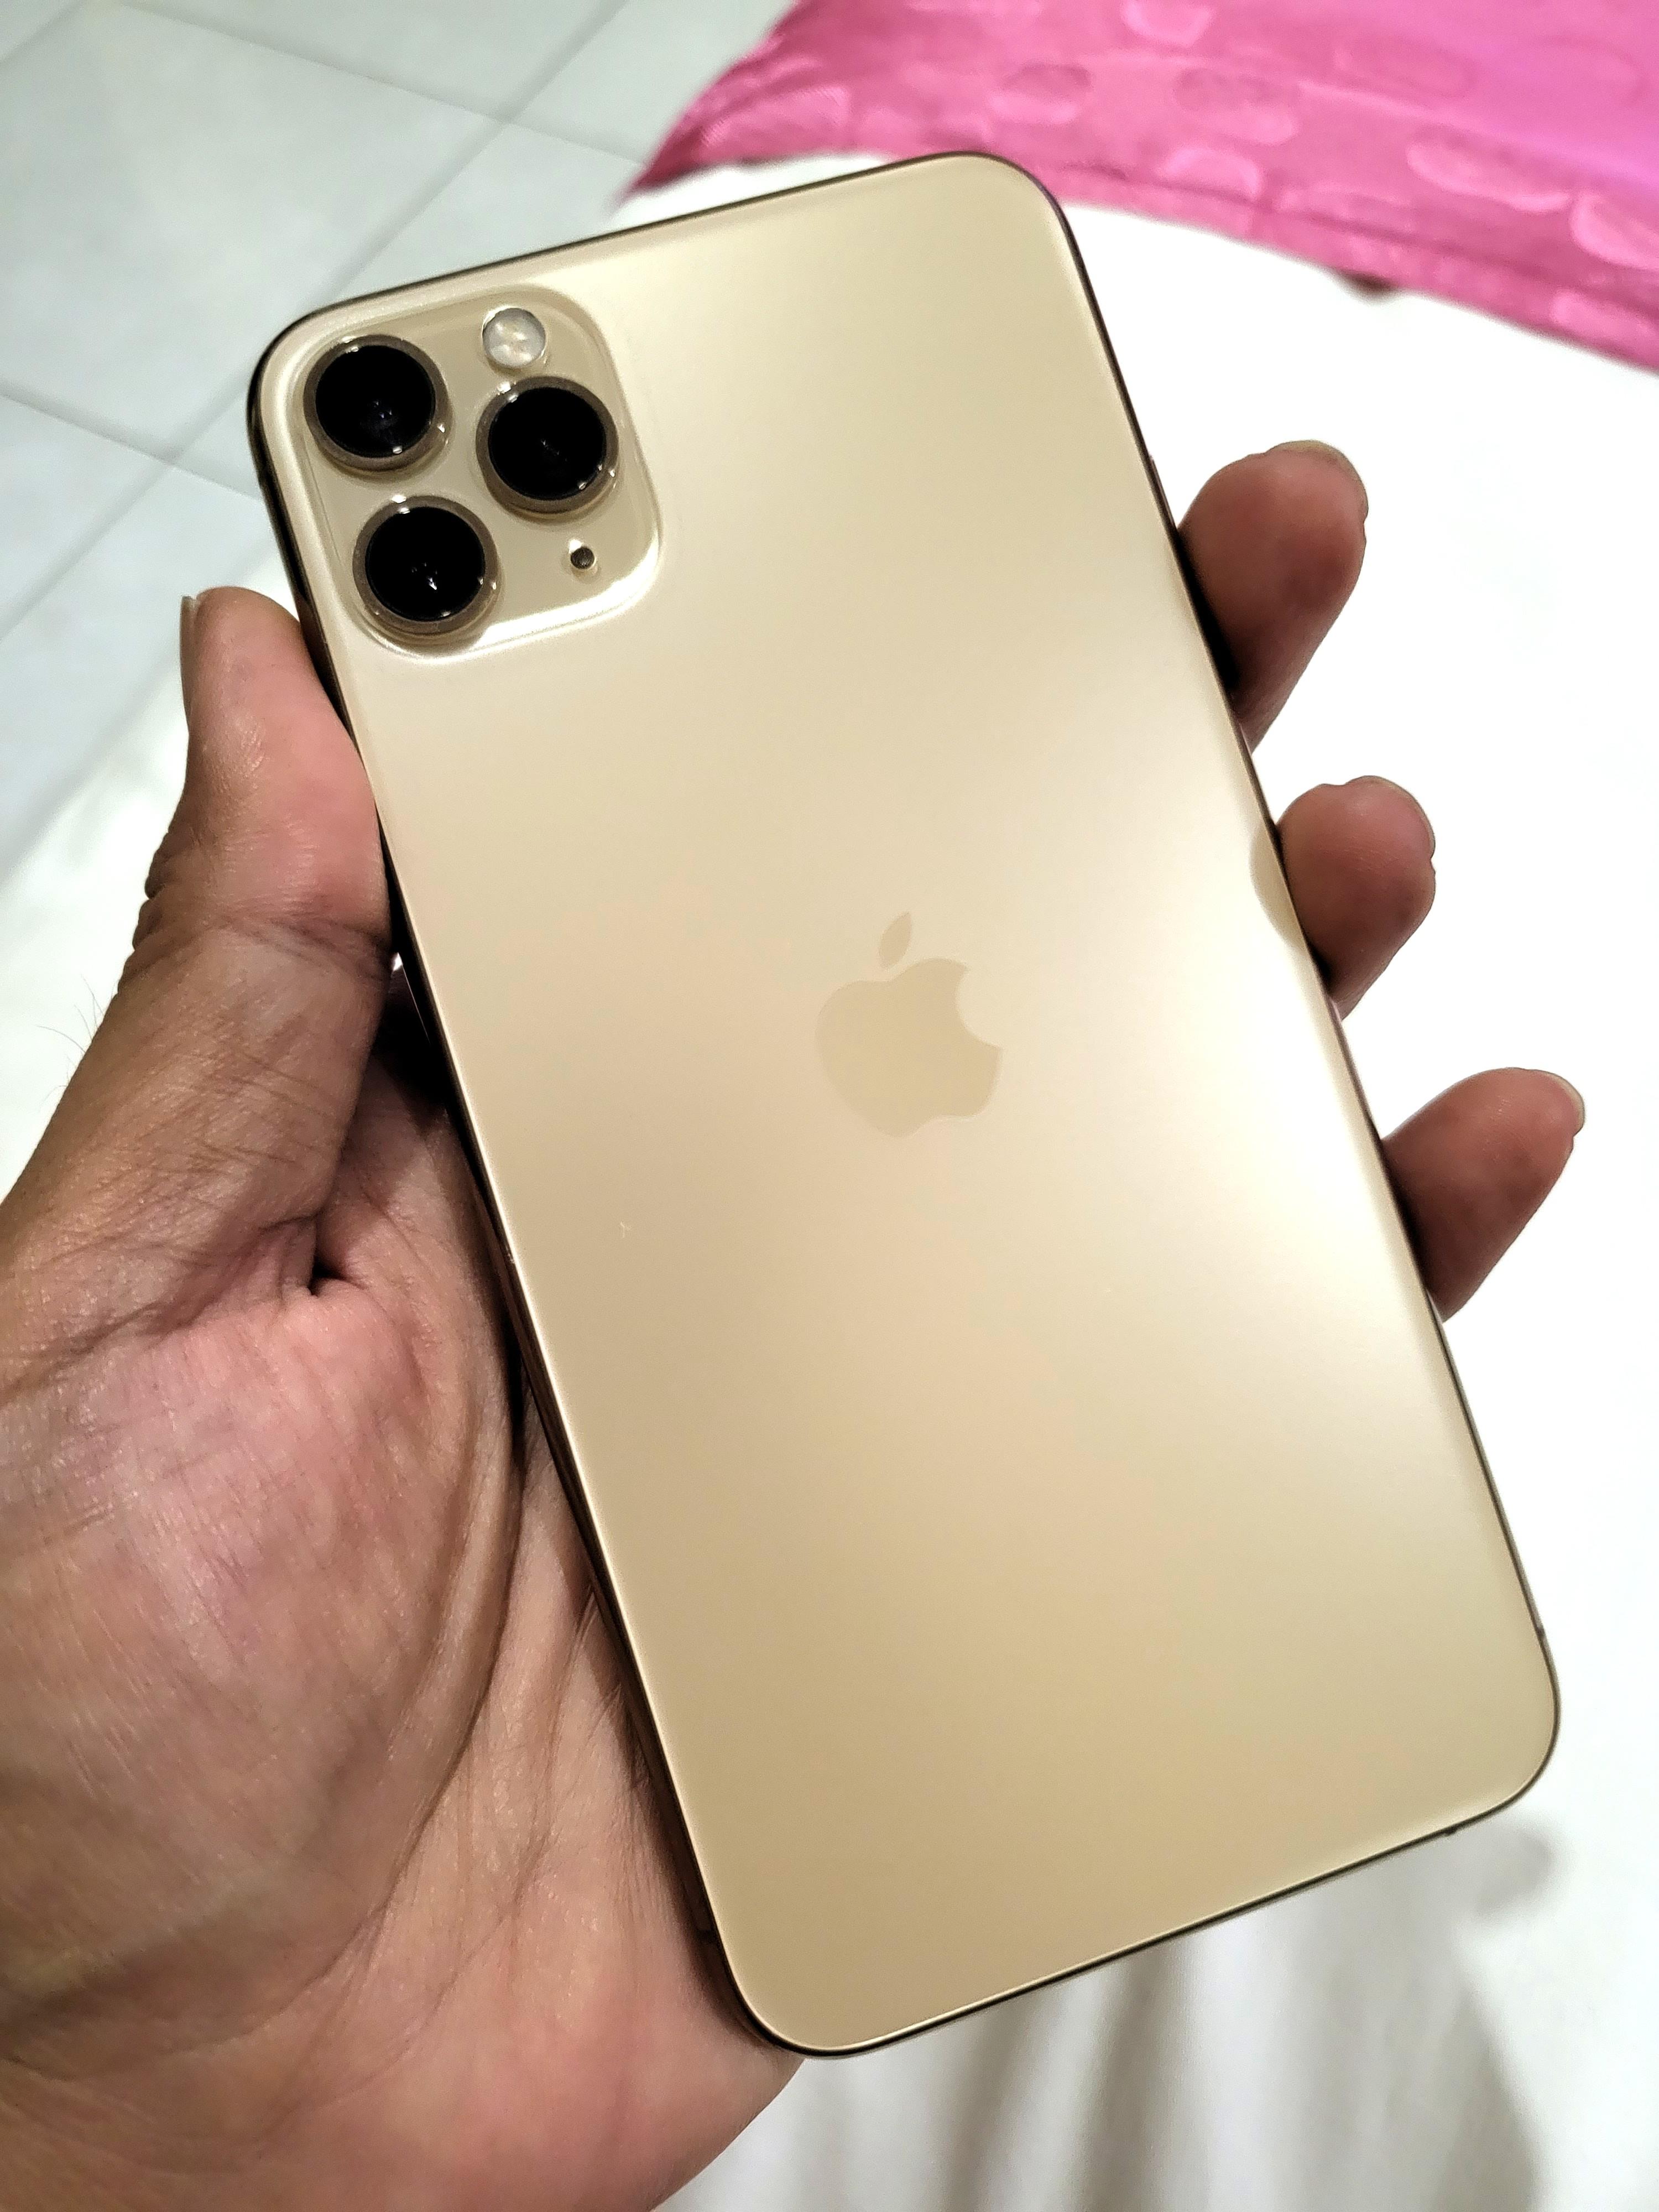 Apple IPhone 11 Pro Max 512gb Gold MY Set, Mobile Phones & Gadgets